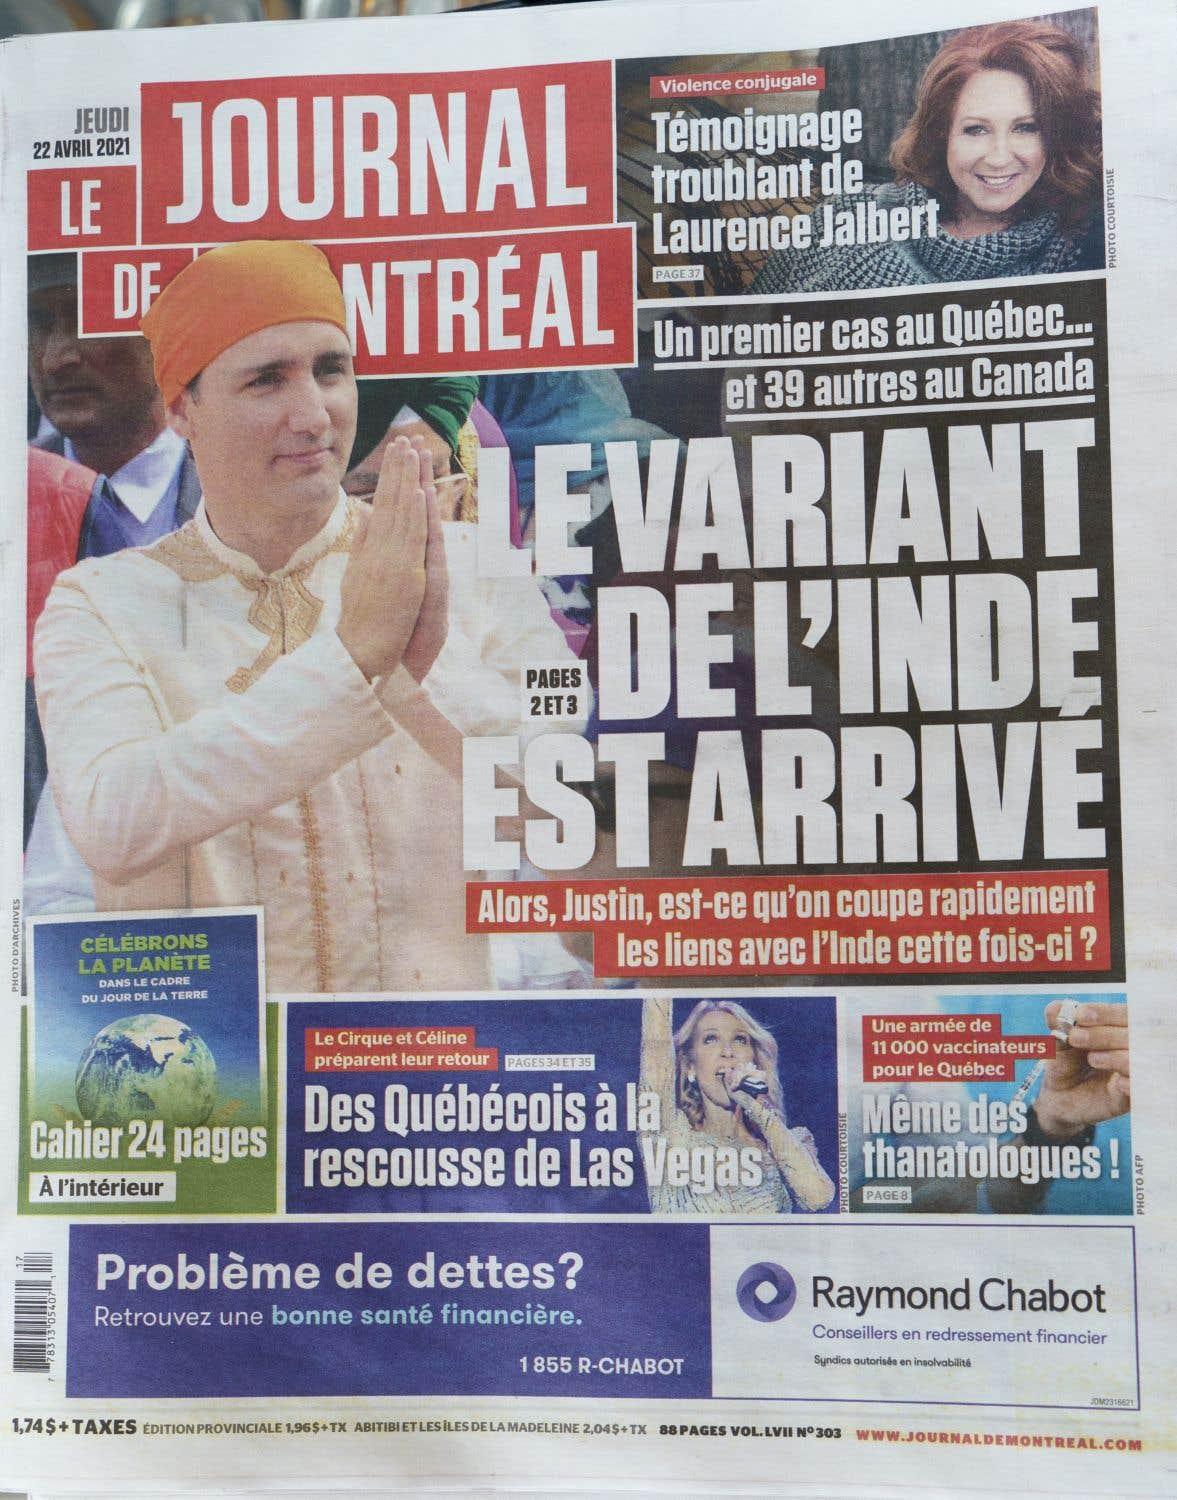 "Le Journal de Montréal" publishes a controversial first page on the "Indian" variant B.1.617 Receive the last hour alerts of duty